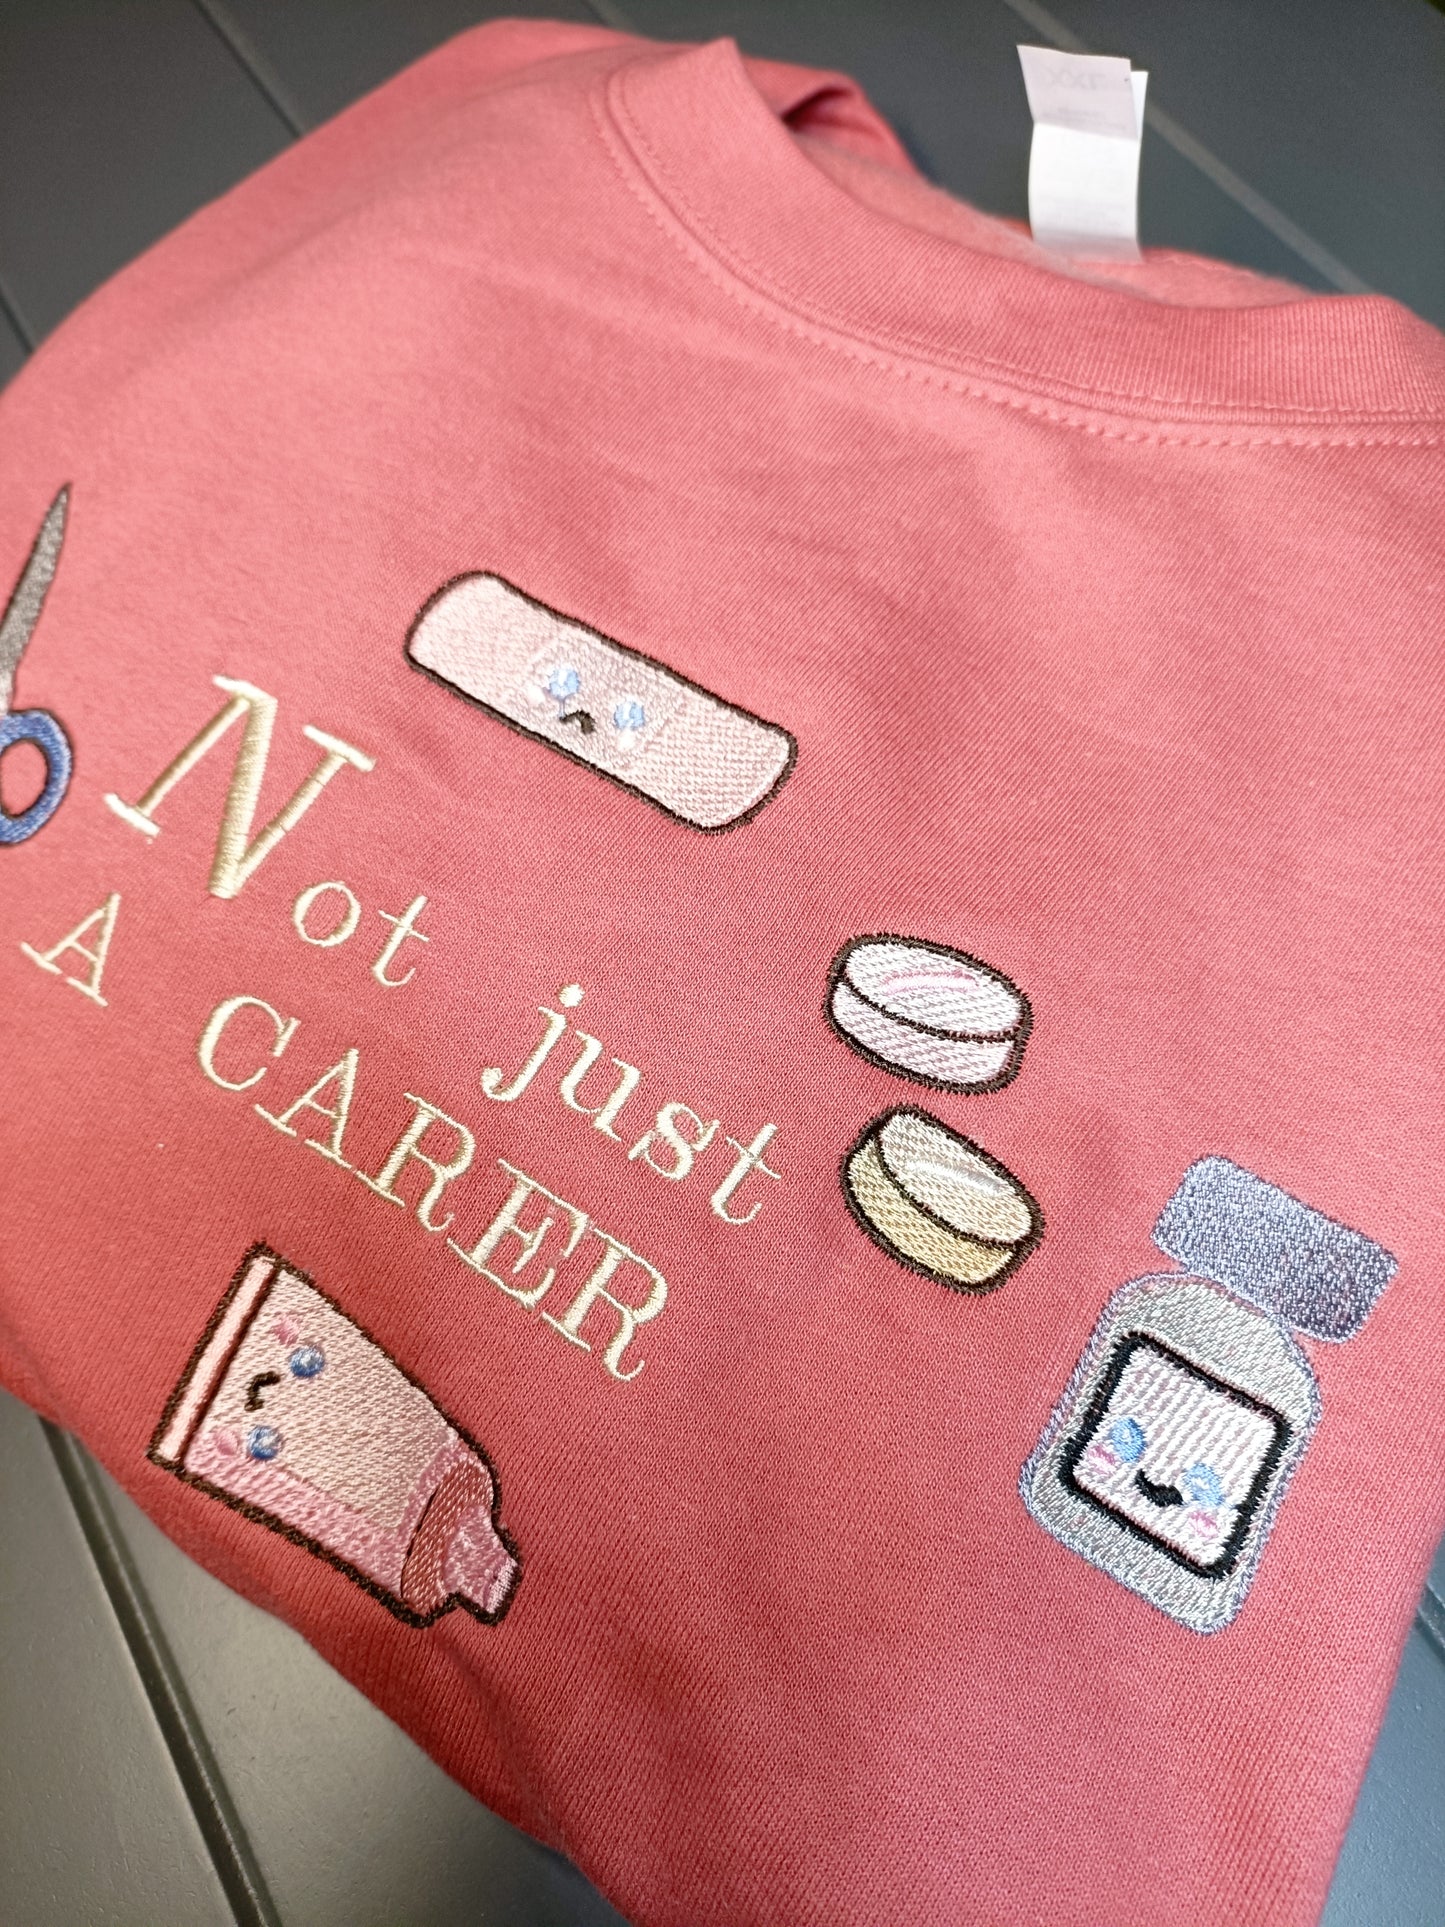 ' Not just a carer' sweater